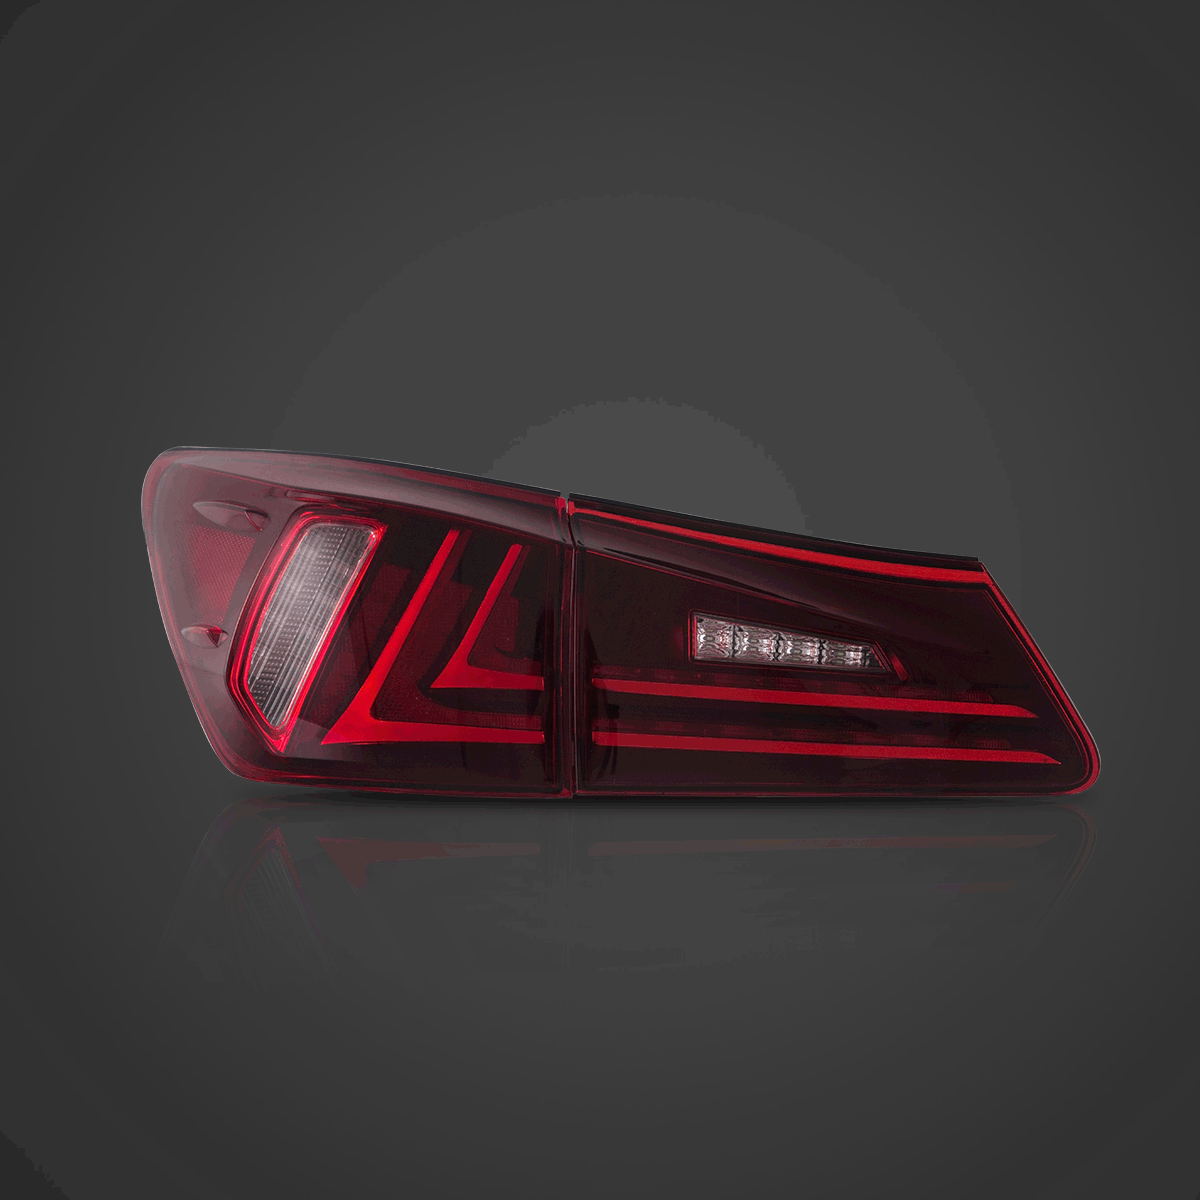 06-12 Lexus IS Series 2th Gen (XE20) Vland LED Tail Lights with Amber Turn Signal